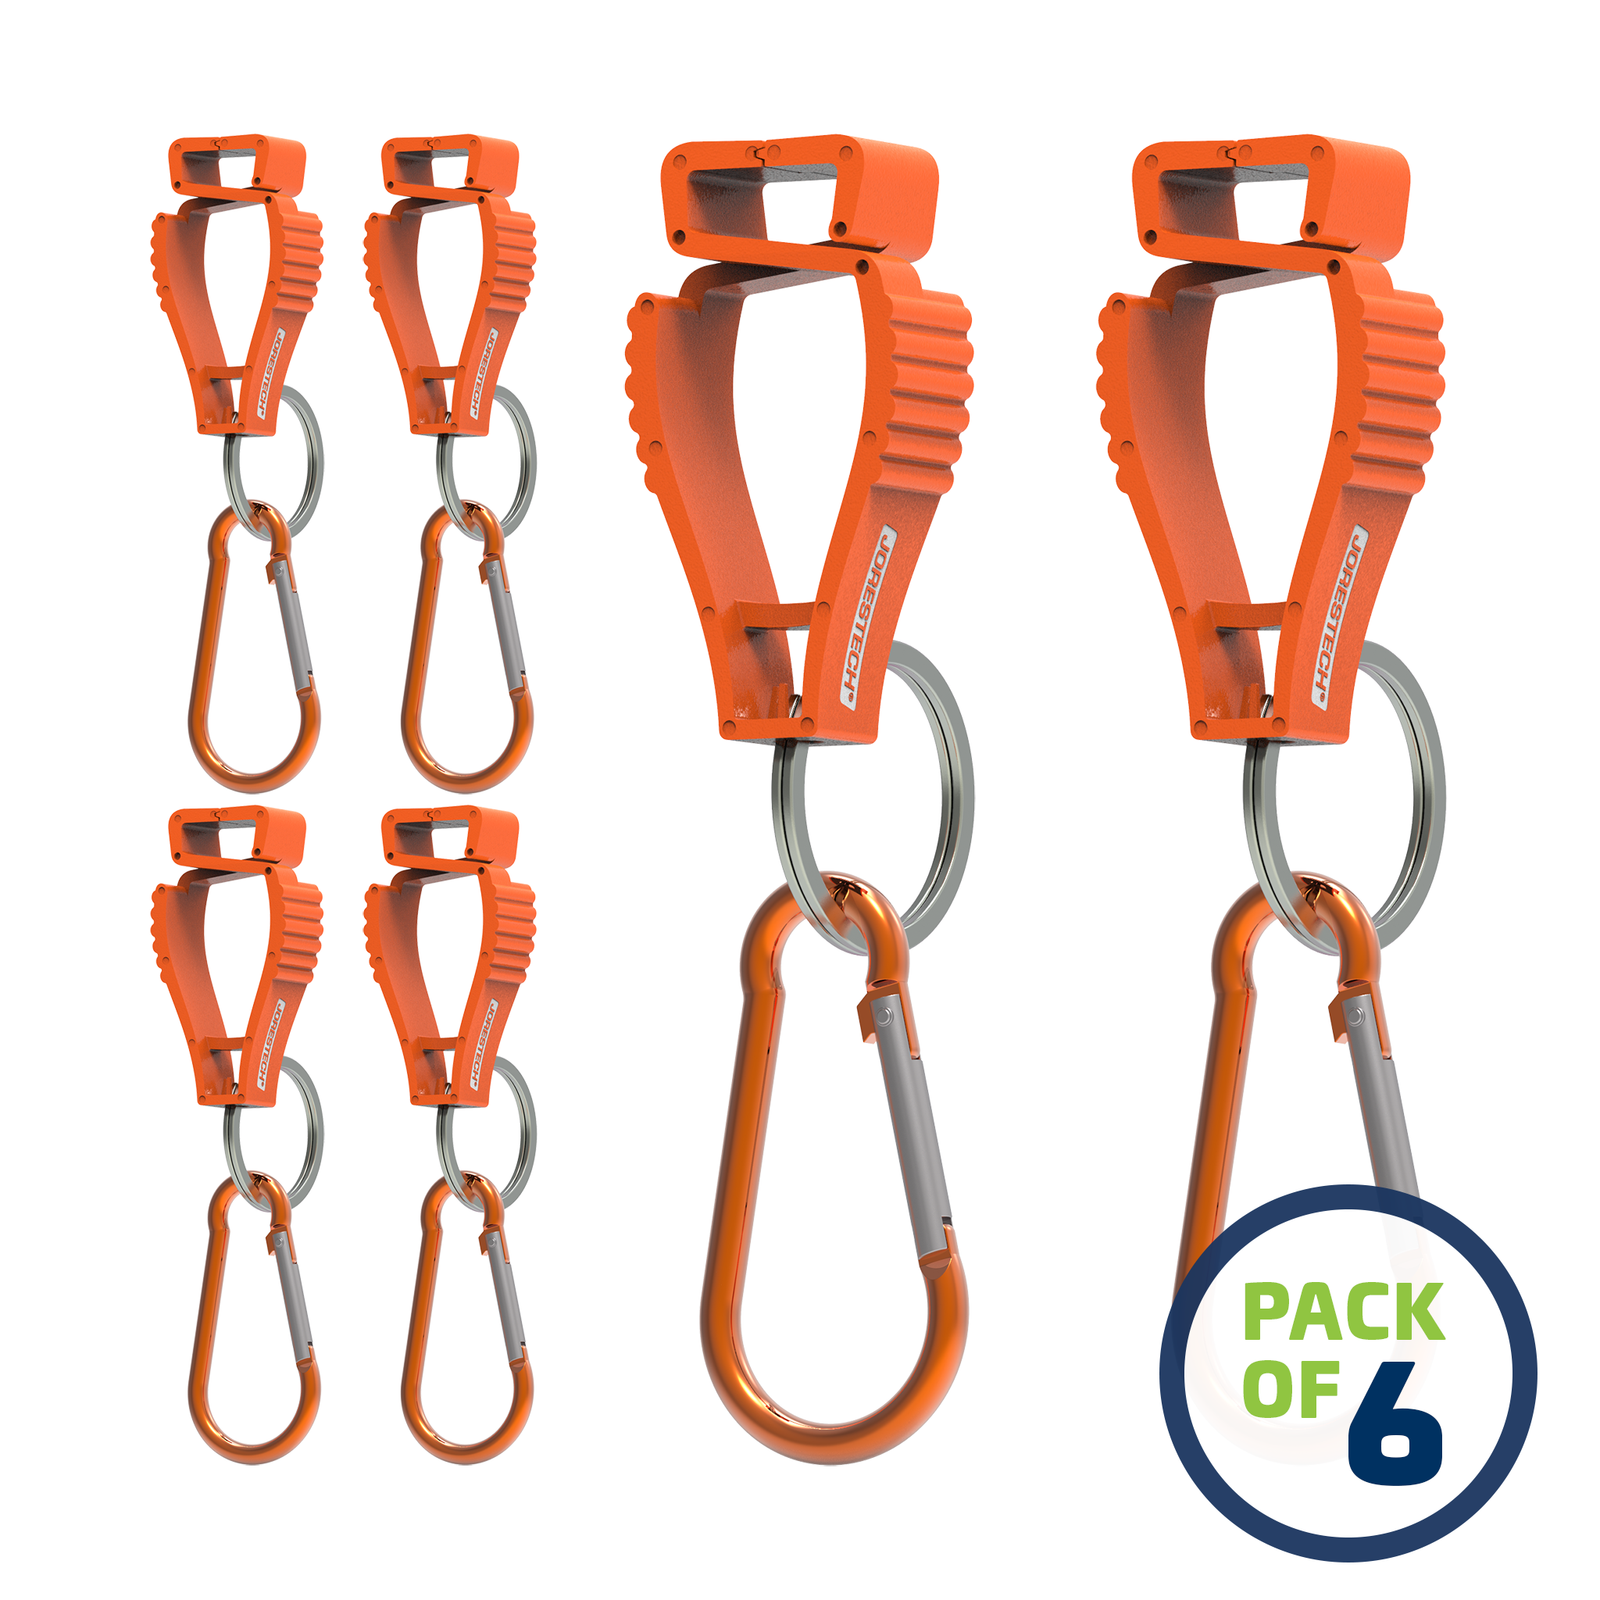 Pack of 6 Orange JORESTECH glove clip safety holders with carabiner 